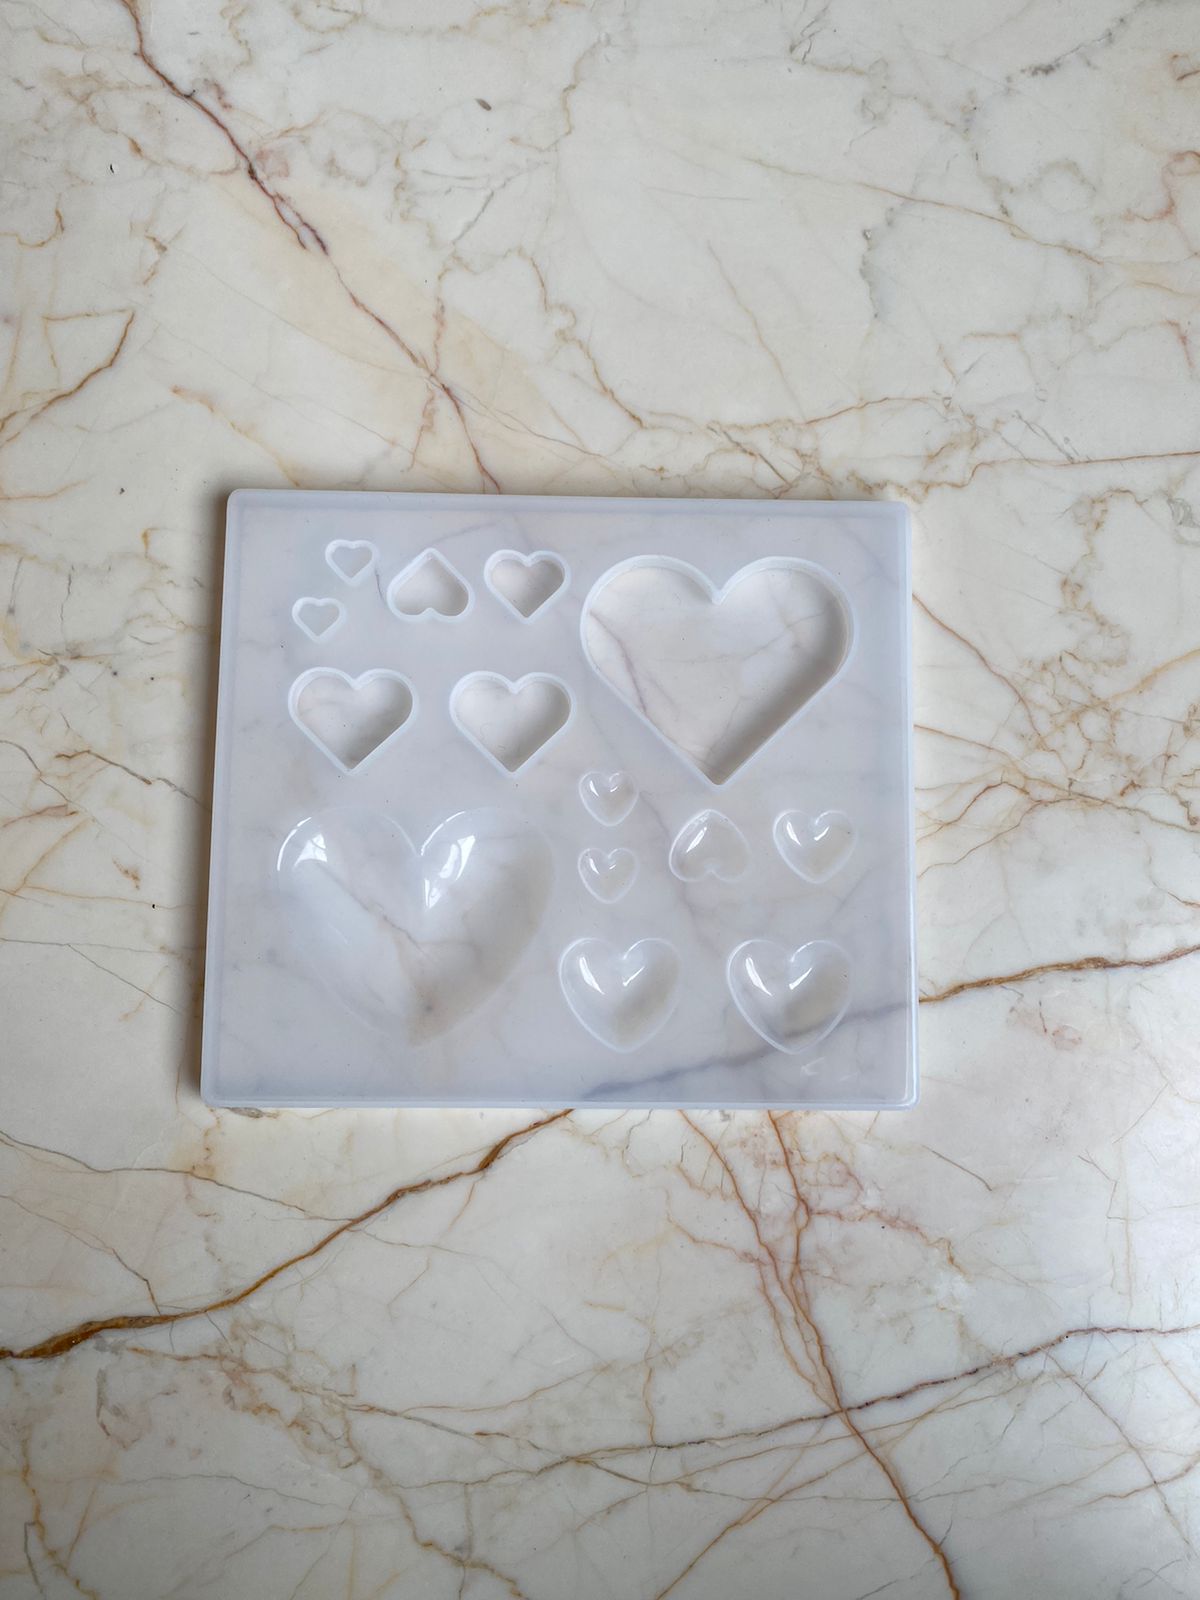 14 in 1 Heart mould - Big